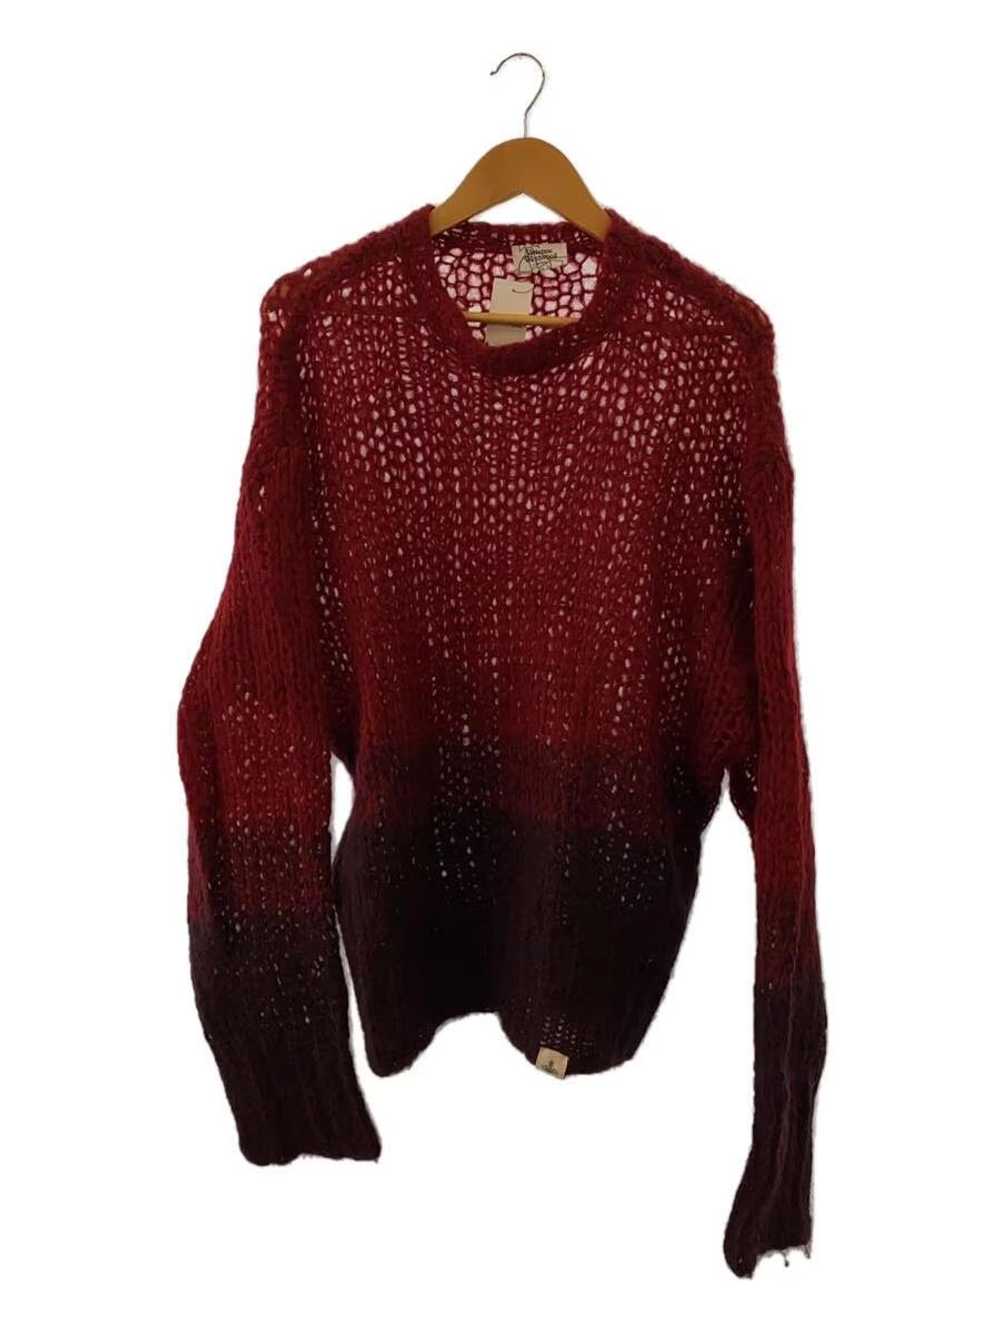 Vivienne Westwood Open Stitch Mohair Knit Sweater - image 1